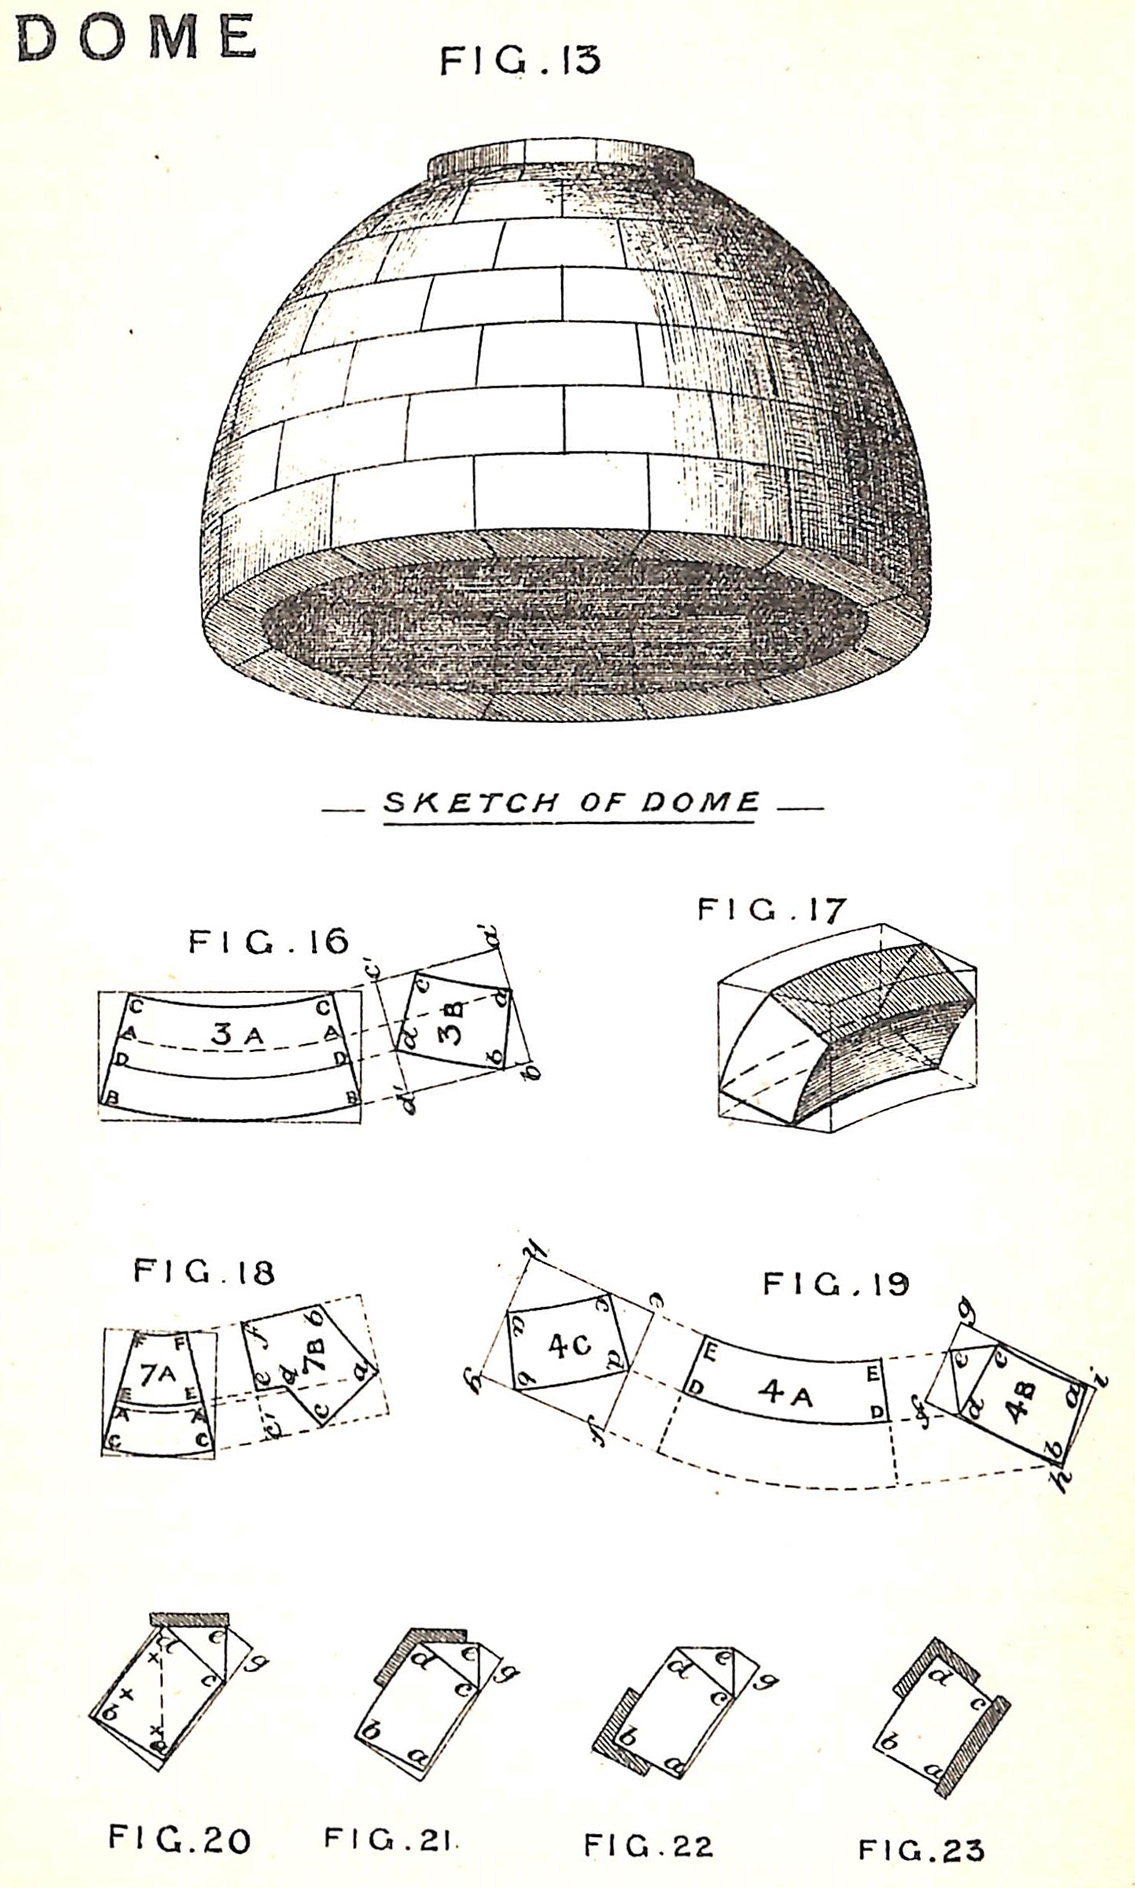 Skeleton of a Dome